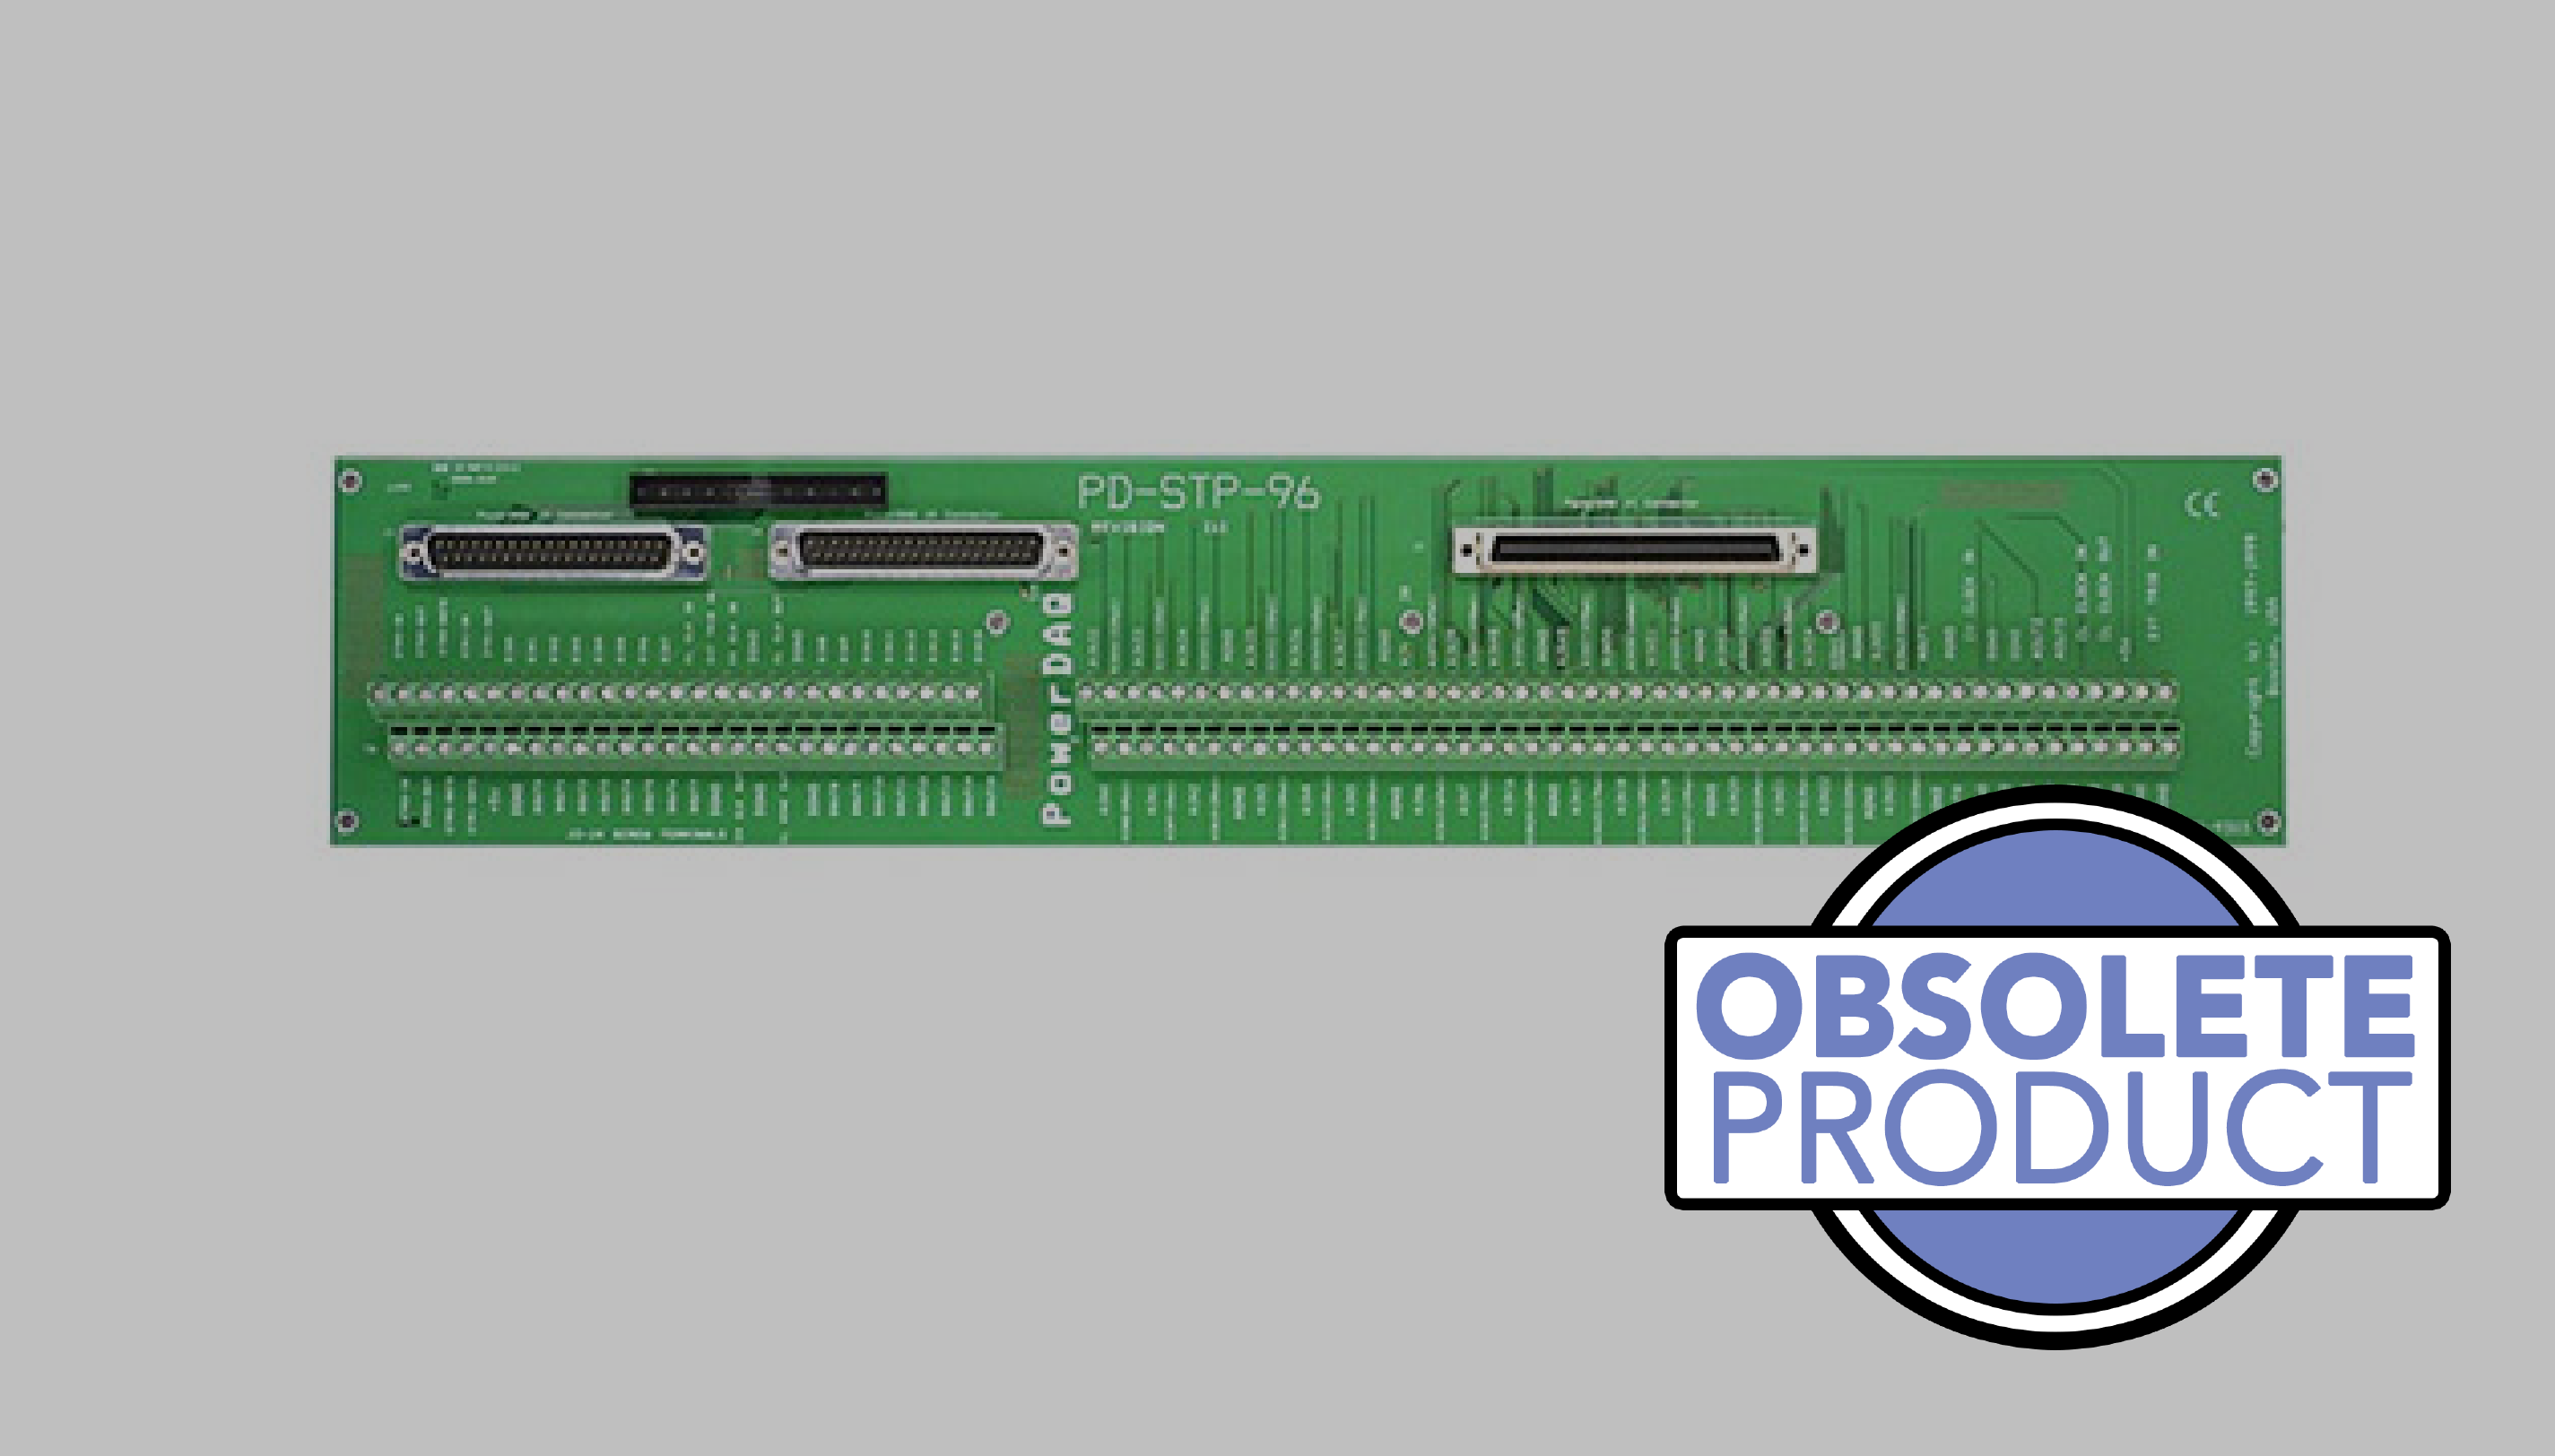 64-channel screw terminal panel with 37-pin, 80-pin and 96-pin connectors